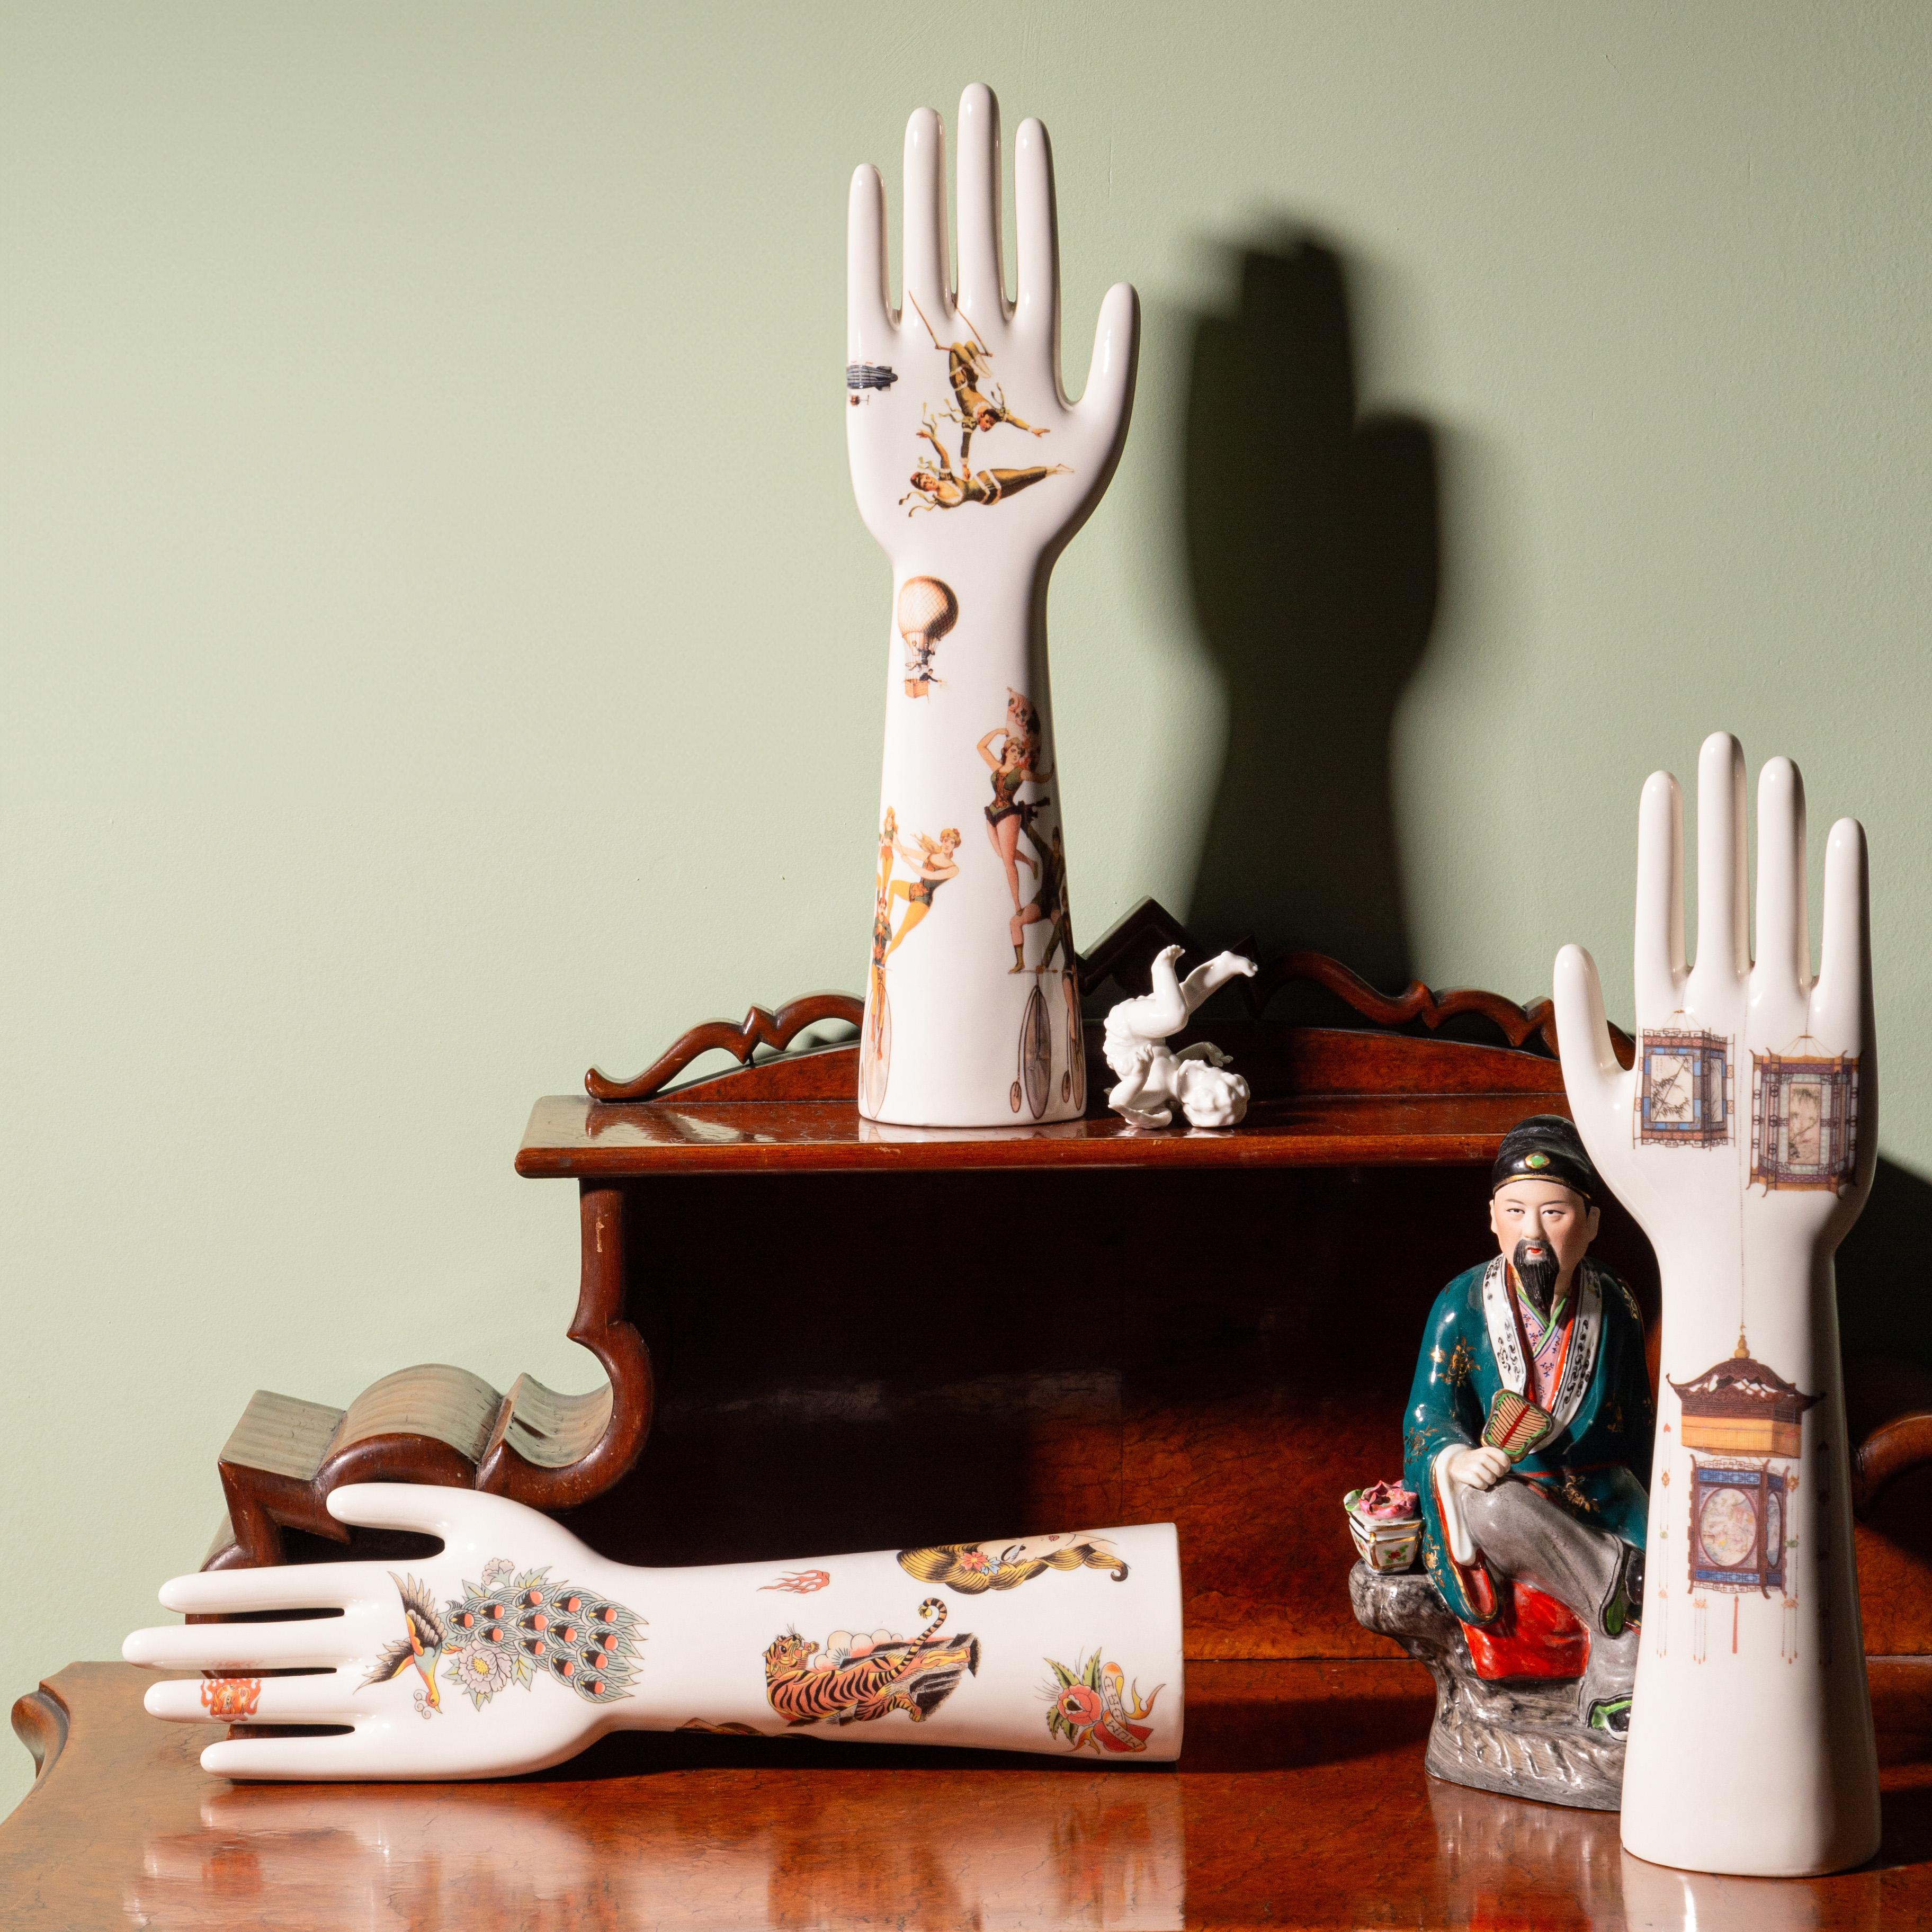 Anatomica, Porcelain Hand with Old School Tattoo Decoration by Vito Nesta For Sale 1